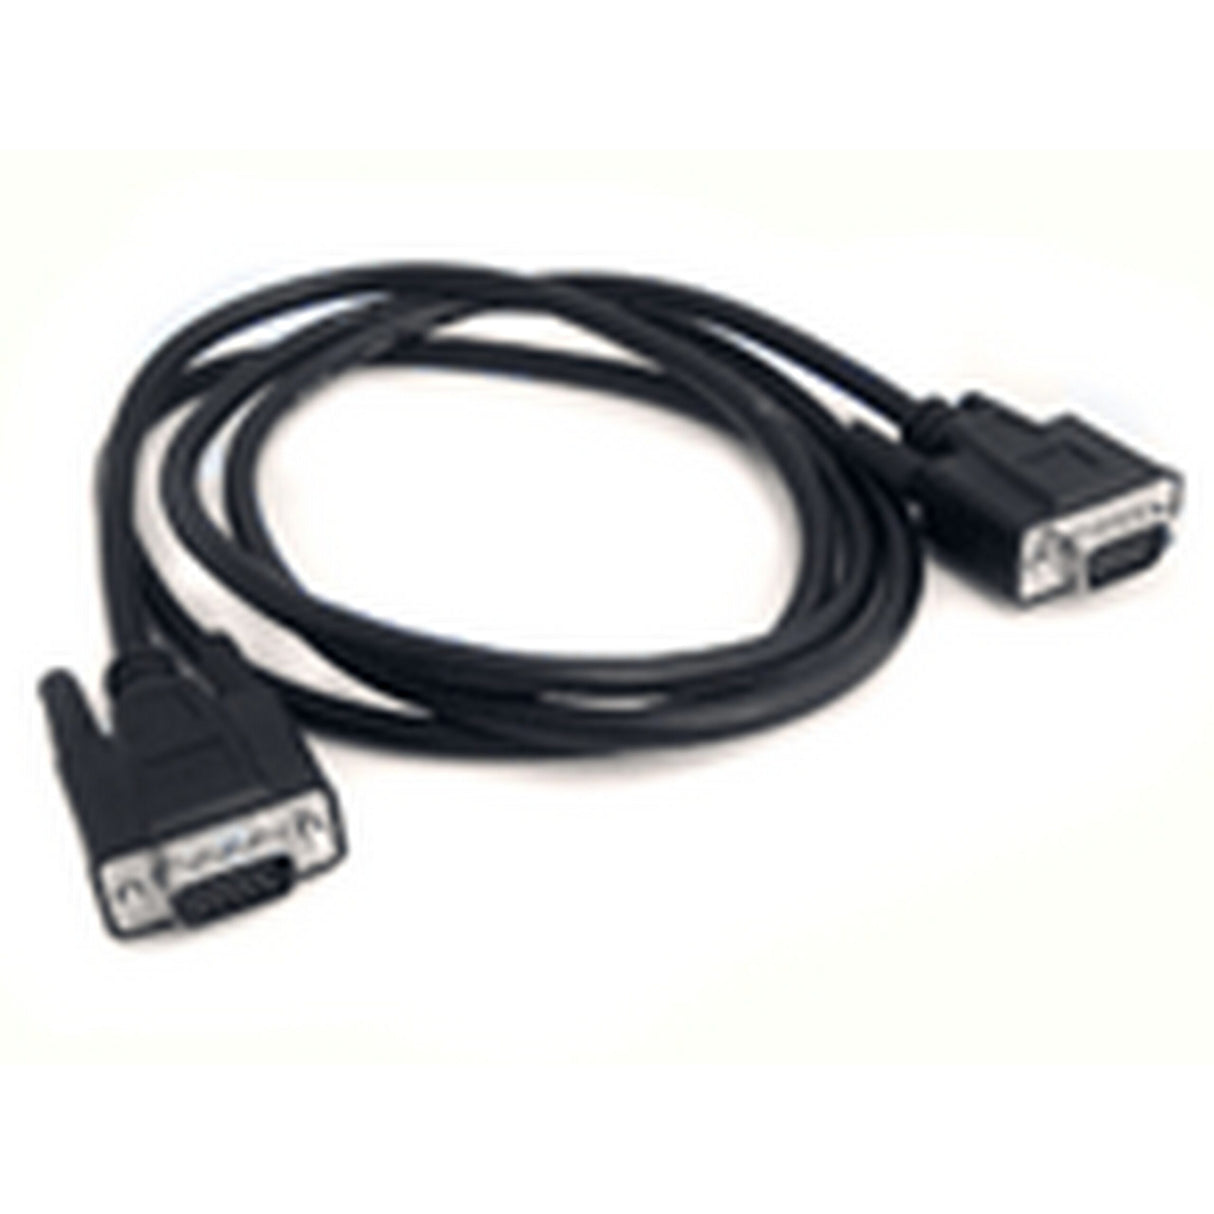 Elmo 5ZA0000150 Replacement RGB Cable for Document Cameras, 6-Foot